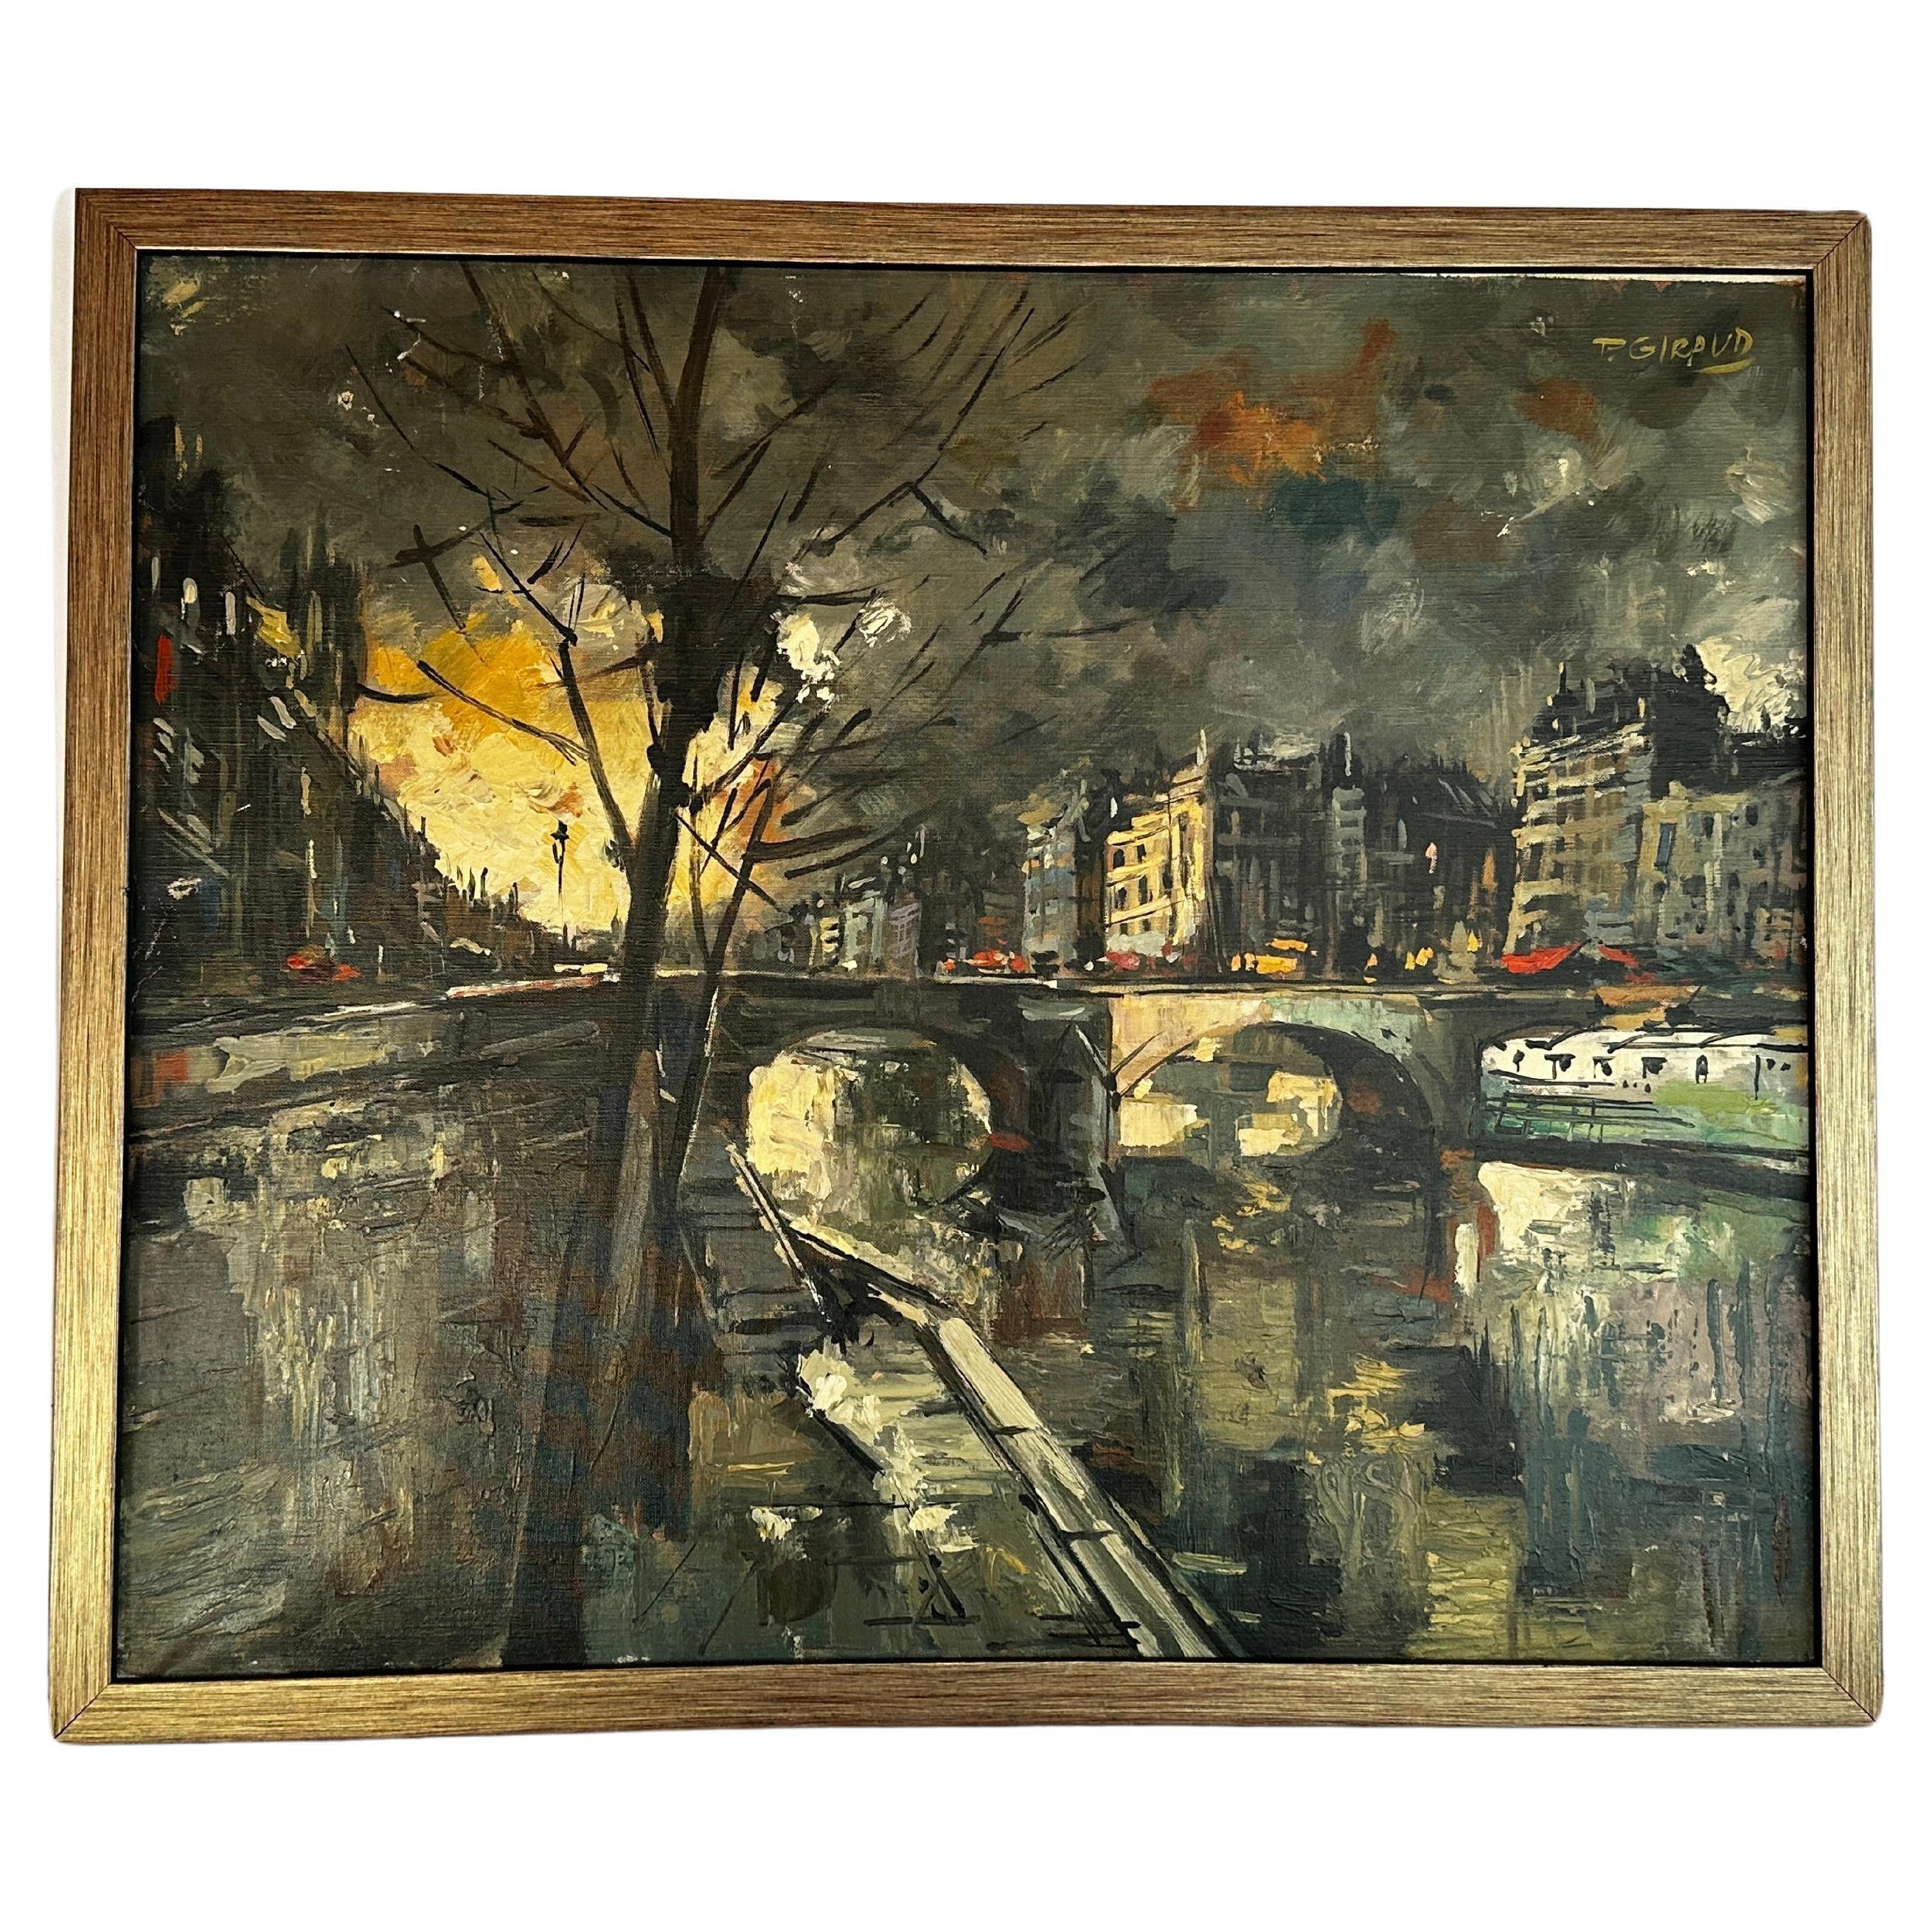 Pierre Giraud's "Embankment of the Seine River" Parisian cityscape, portraying the iconic Pont au Change bridge, offers a mesmerizing scene at dusk. 
A mastering execution of chiaroscuro. The sunset illuminates select points across the canvas—a